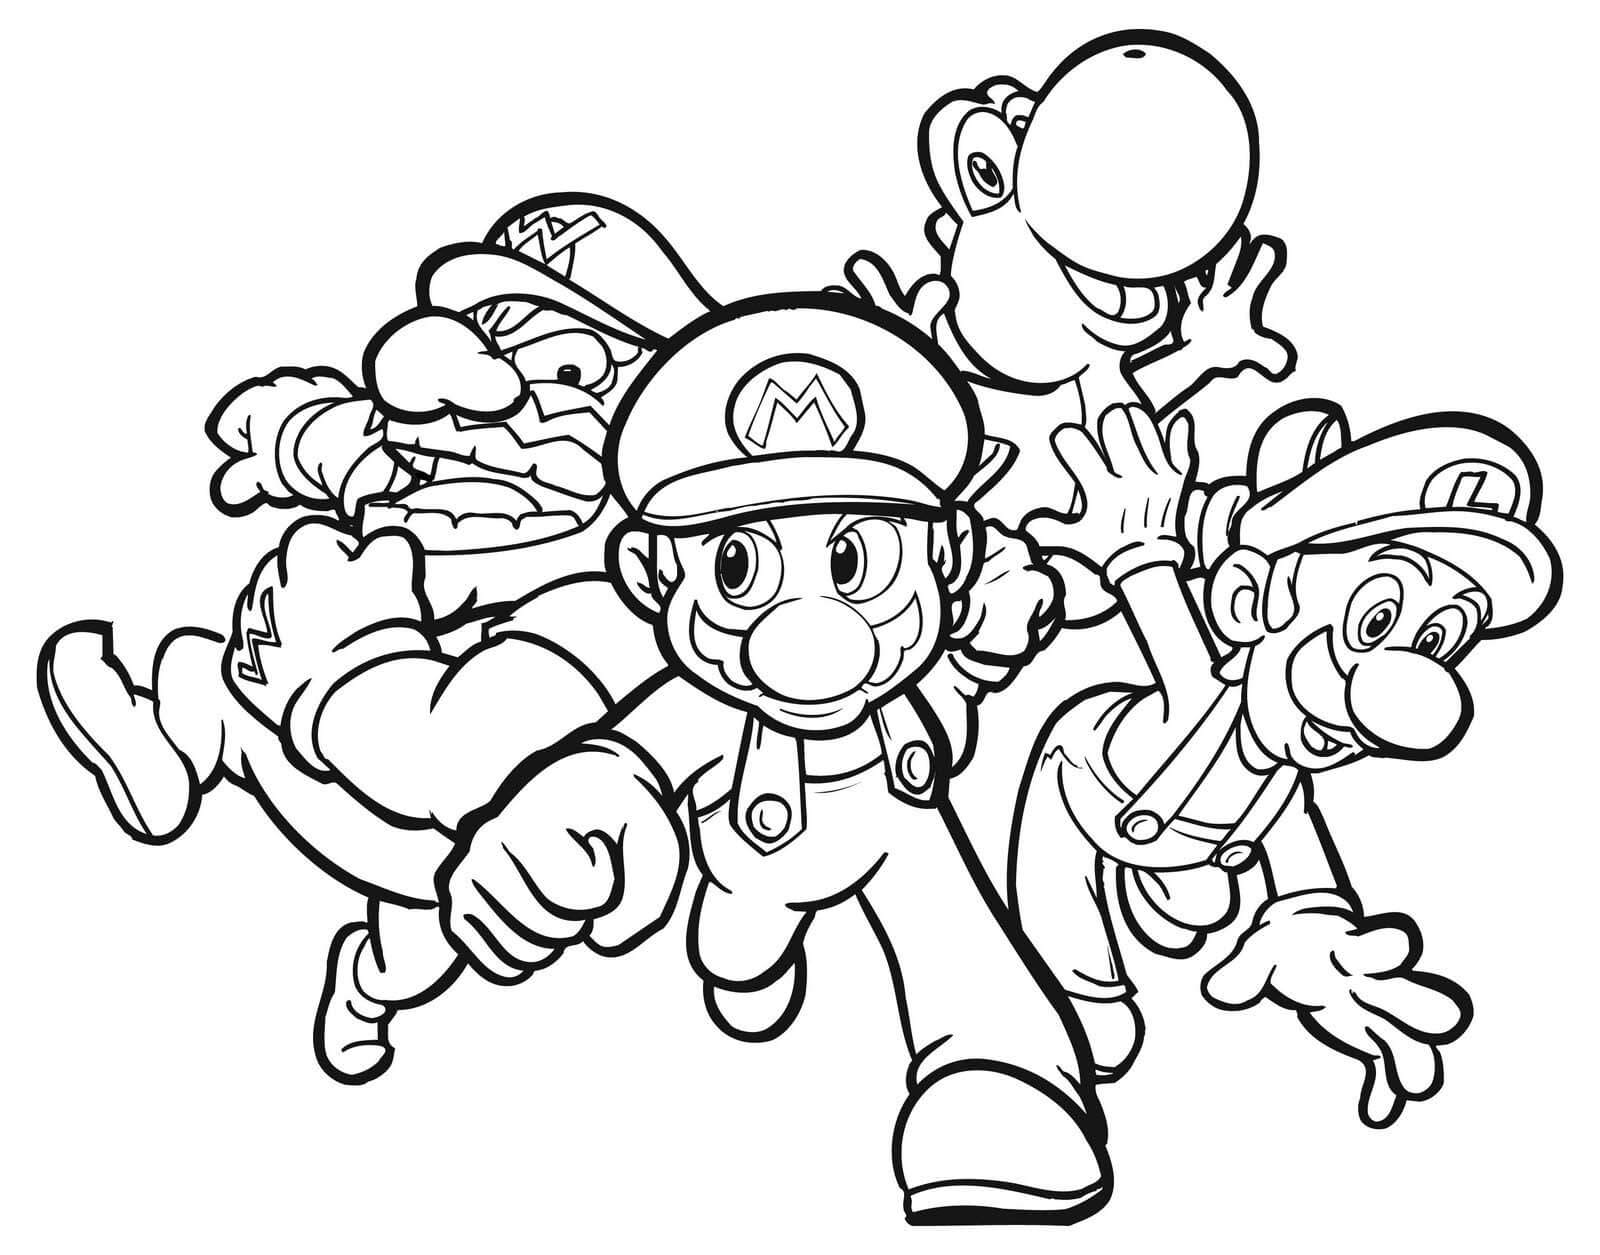 Mario Bros Characters Coloring Pages